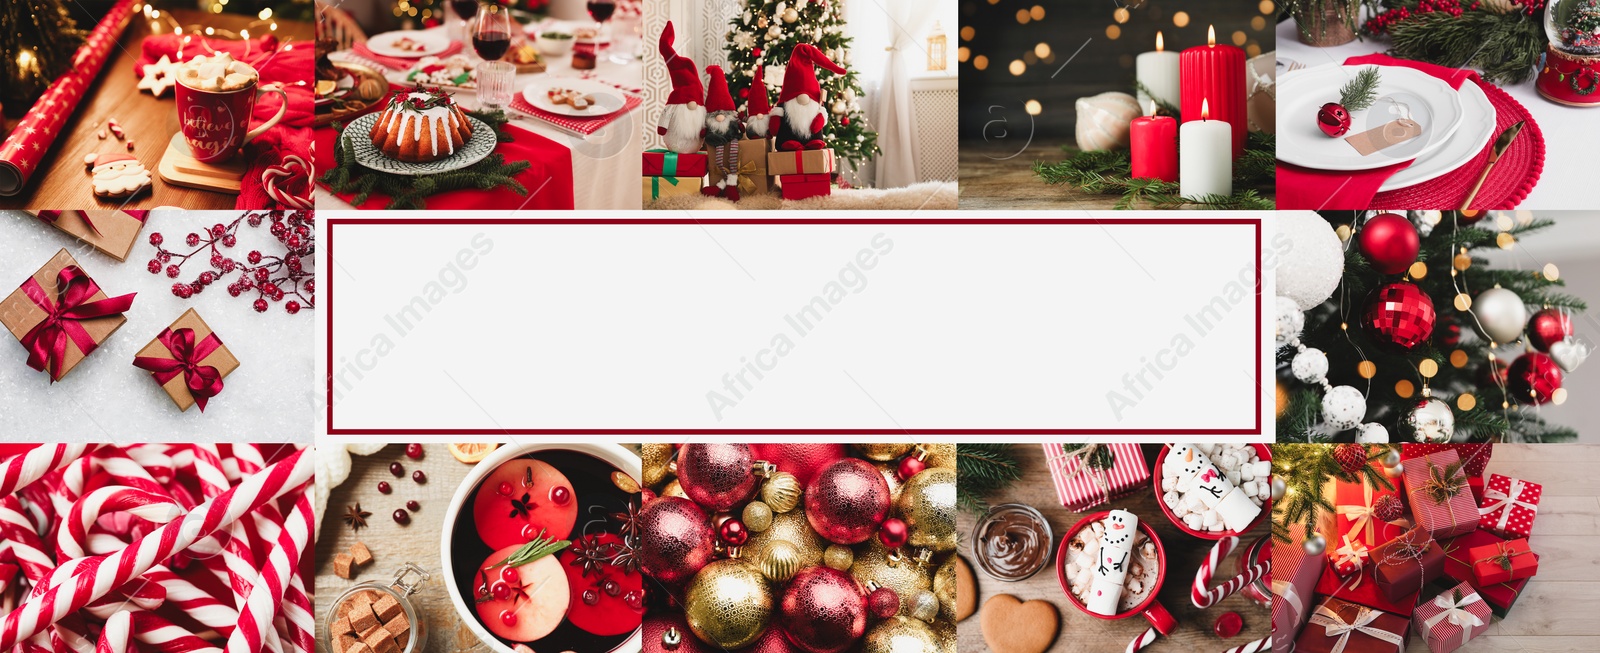 Image of Christmas themed collage, banner design. Collection of festive photos, space for text